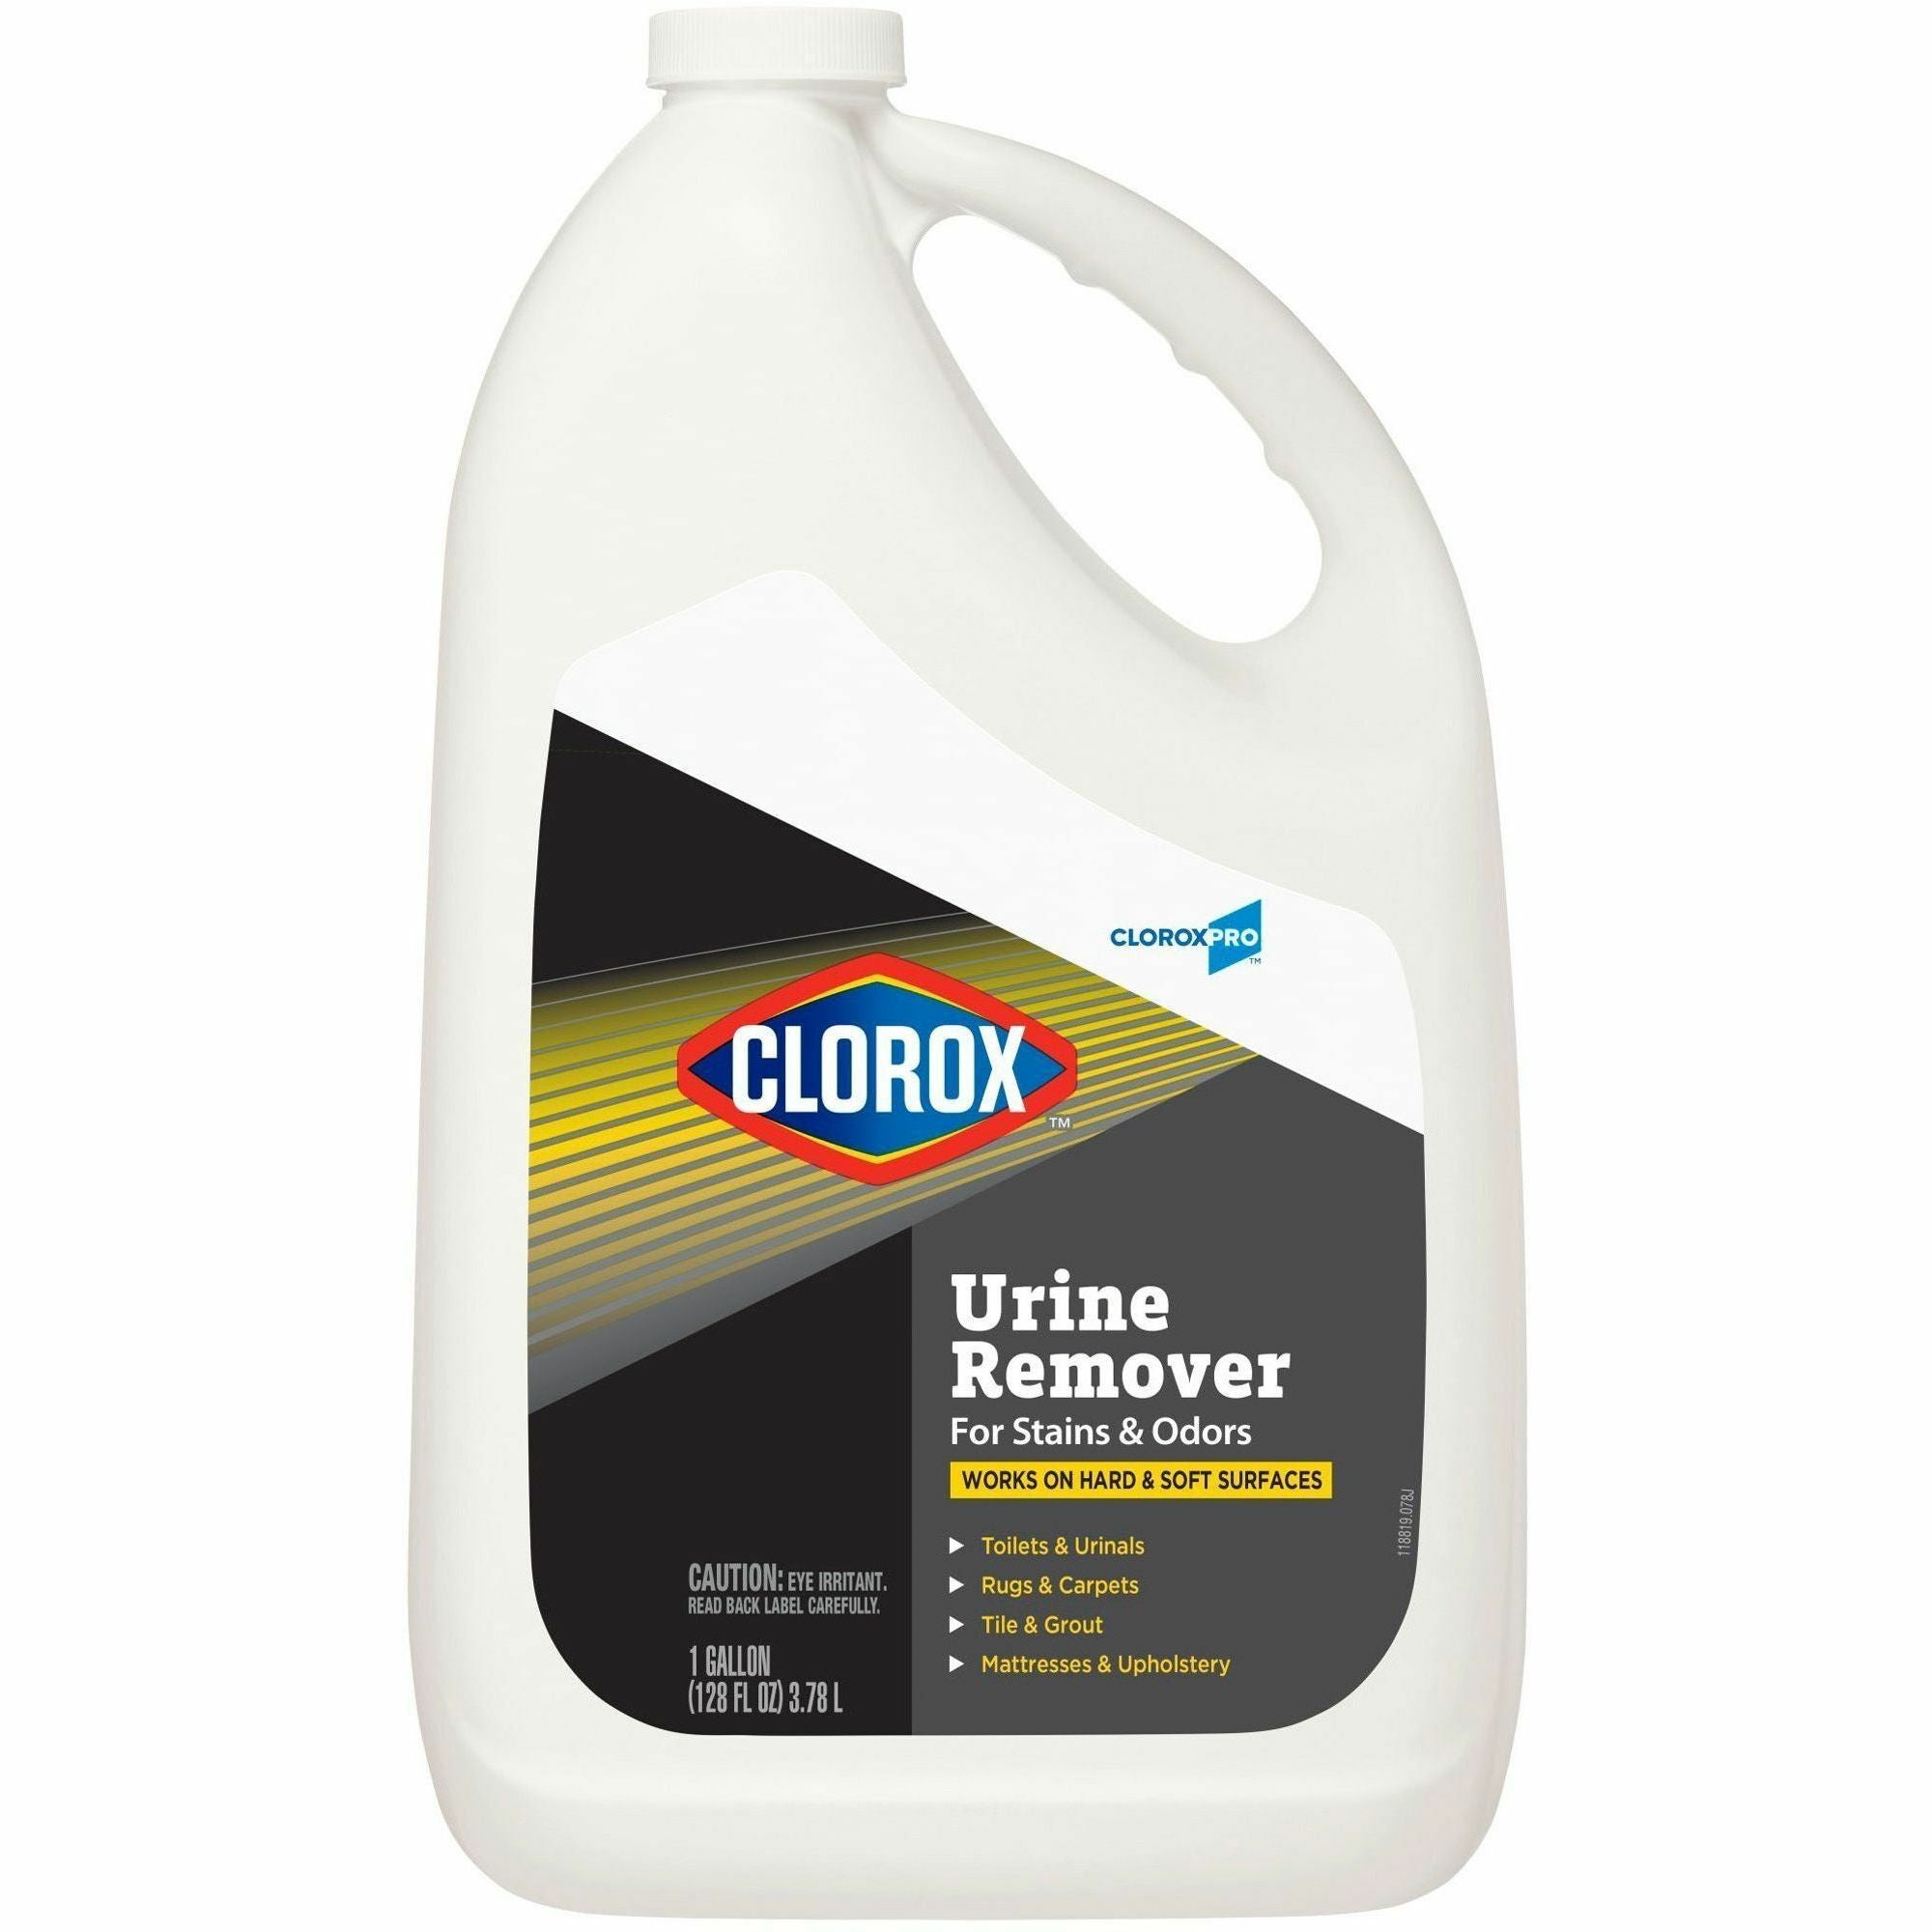 CloroxPro Urine Remover for Stains and Odors Refill - 128 fl oz (4 quart) - 60 / Bundle - Bleach-free - Clear - 2